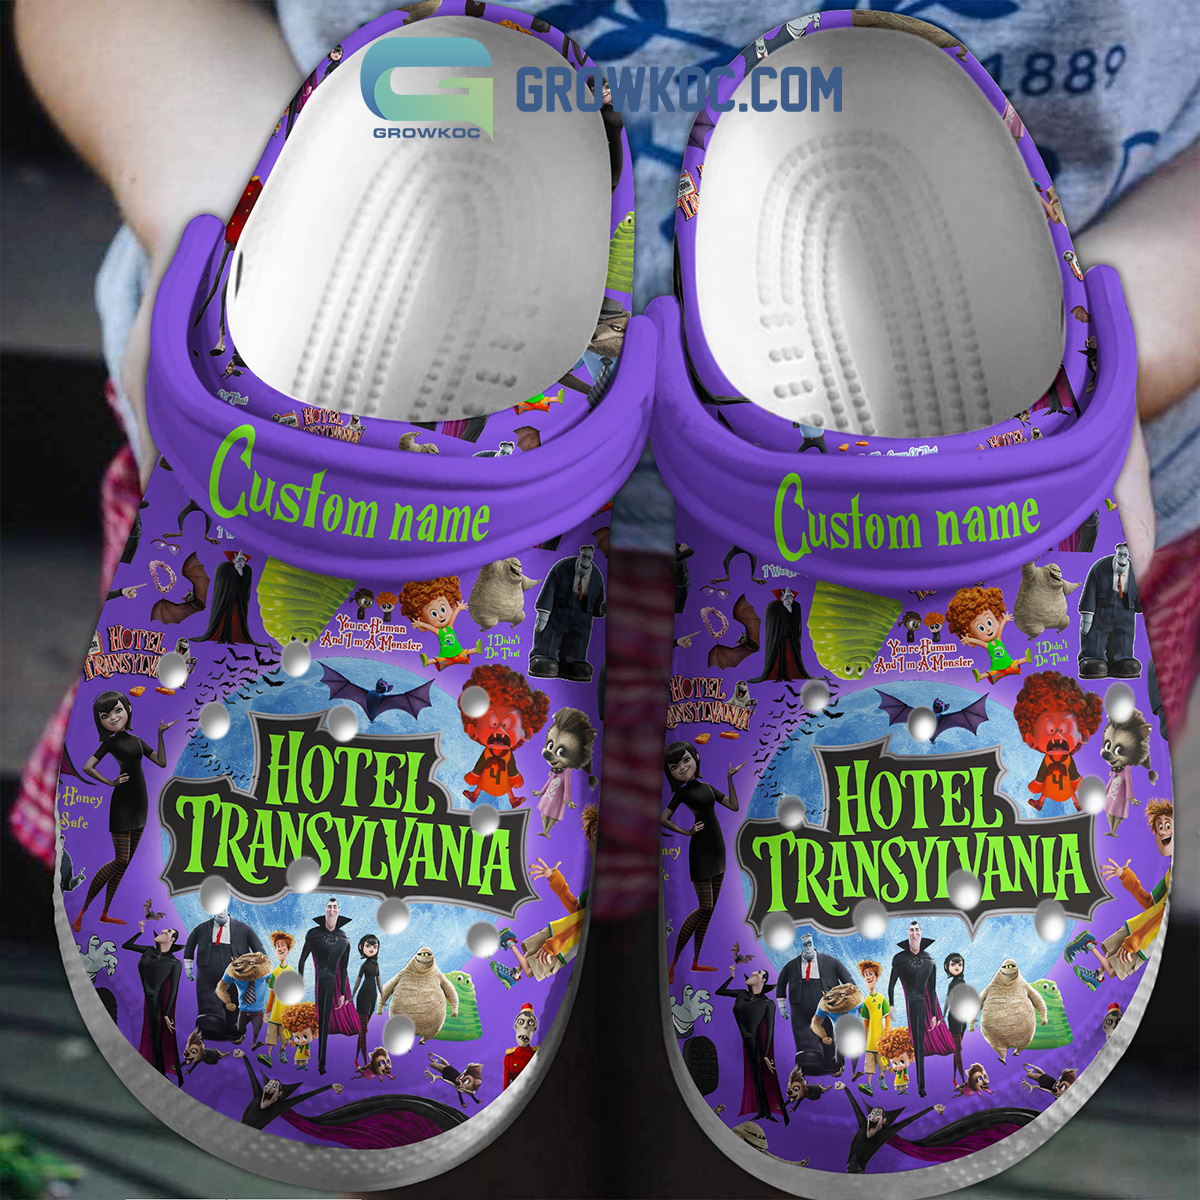 We Found Your Next Pair of Disney Crocs. You're Welcome.